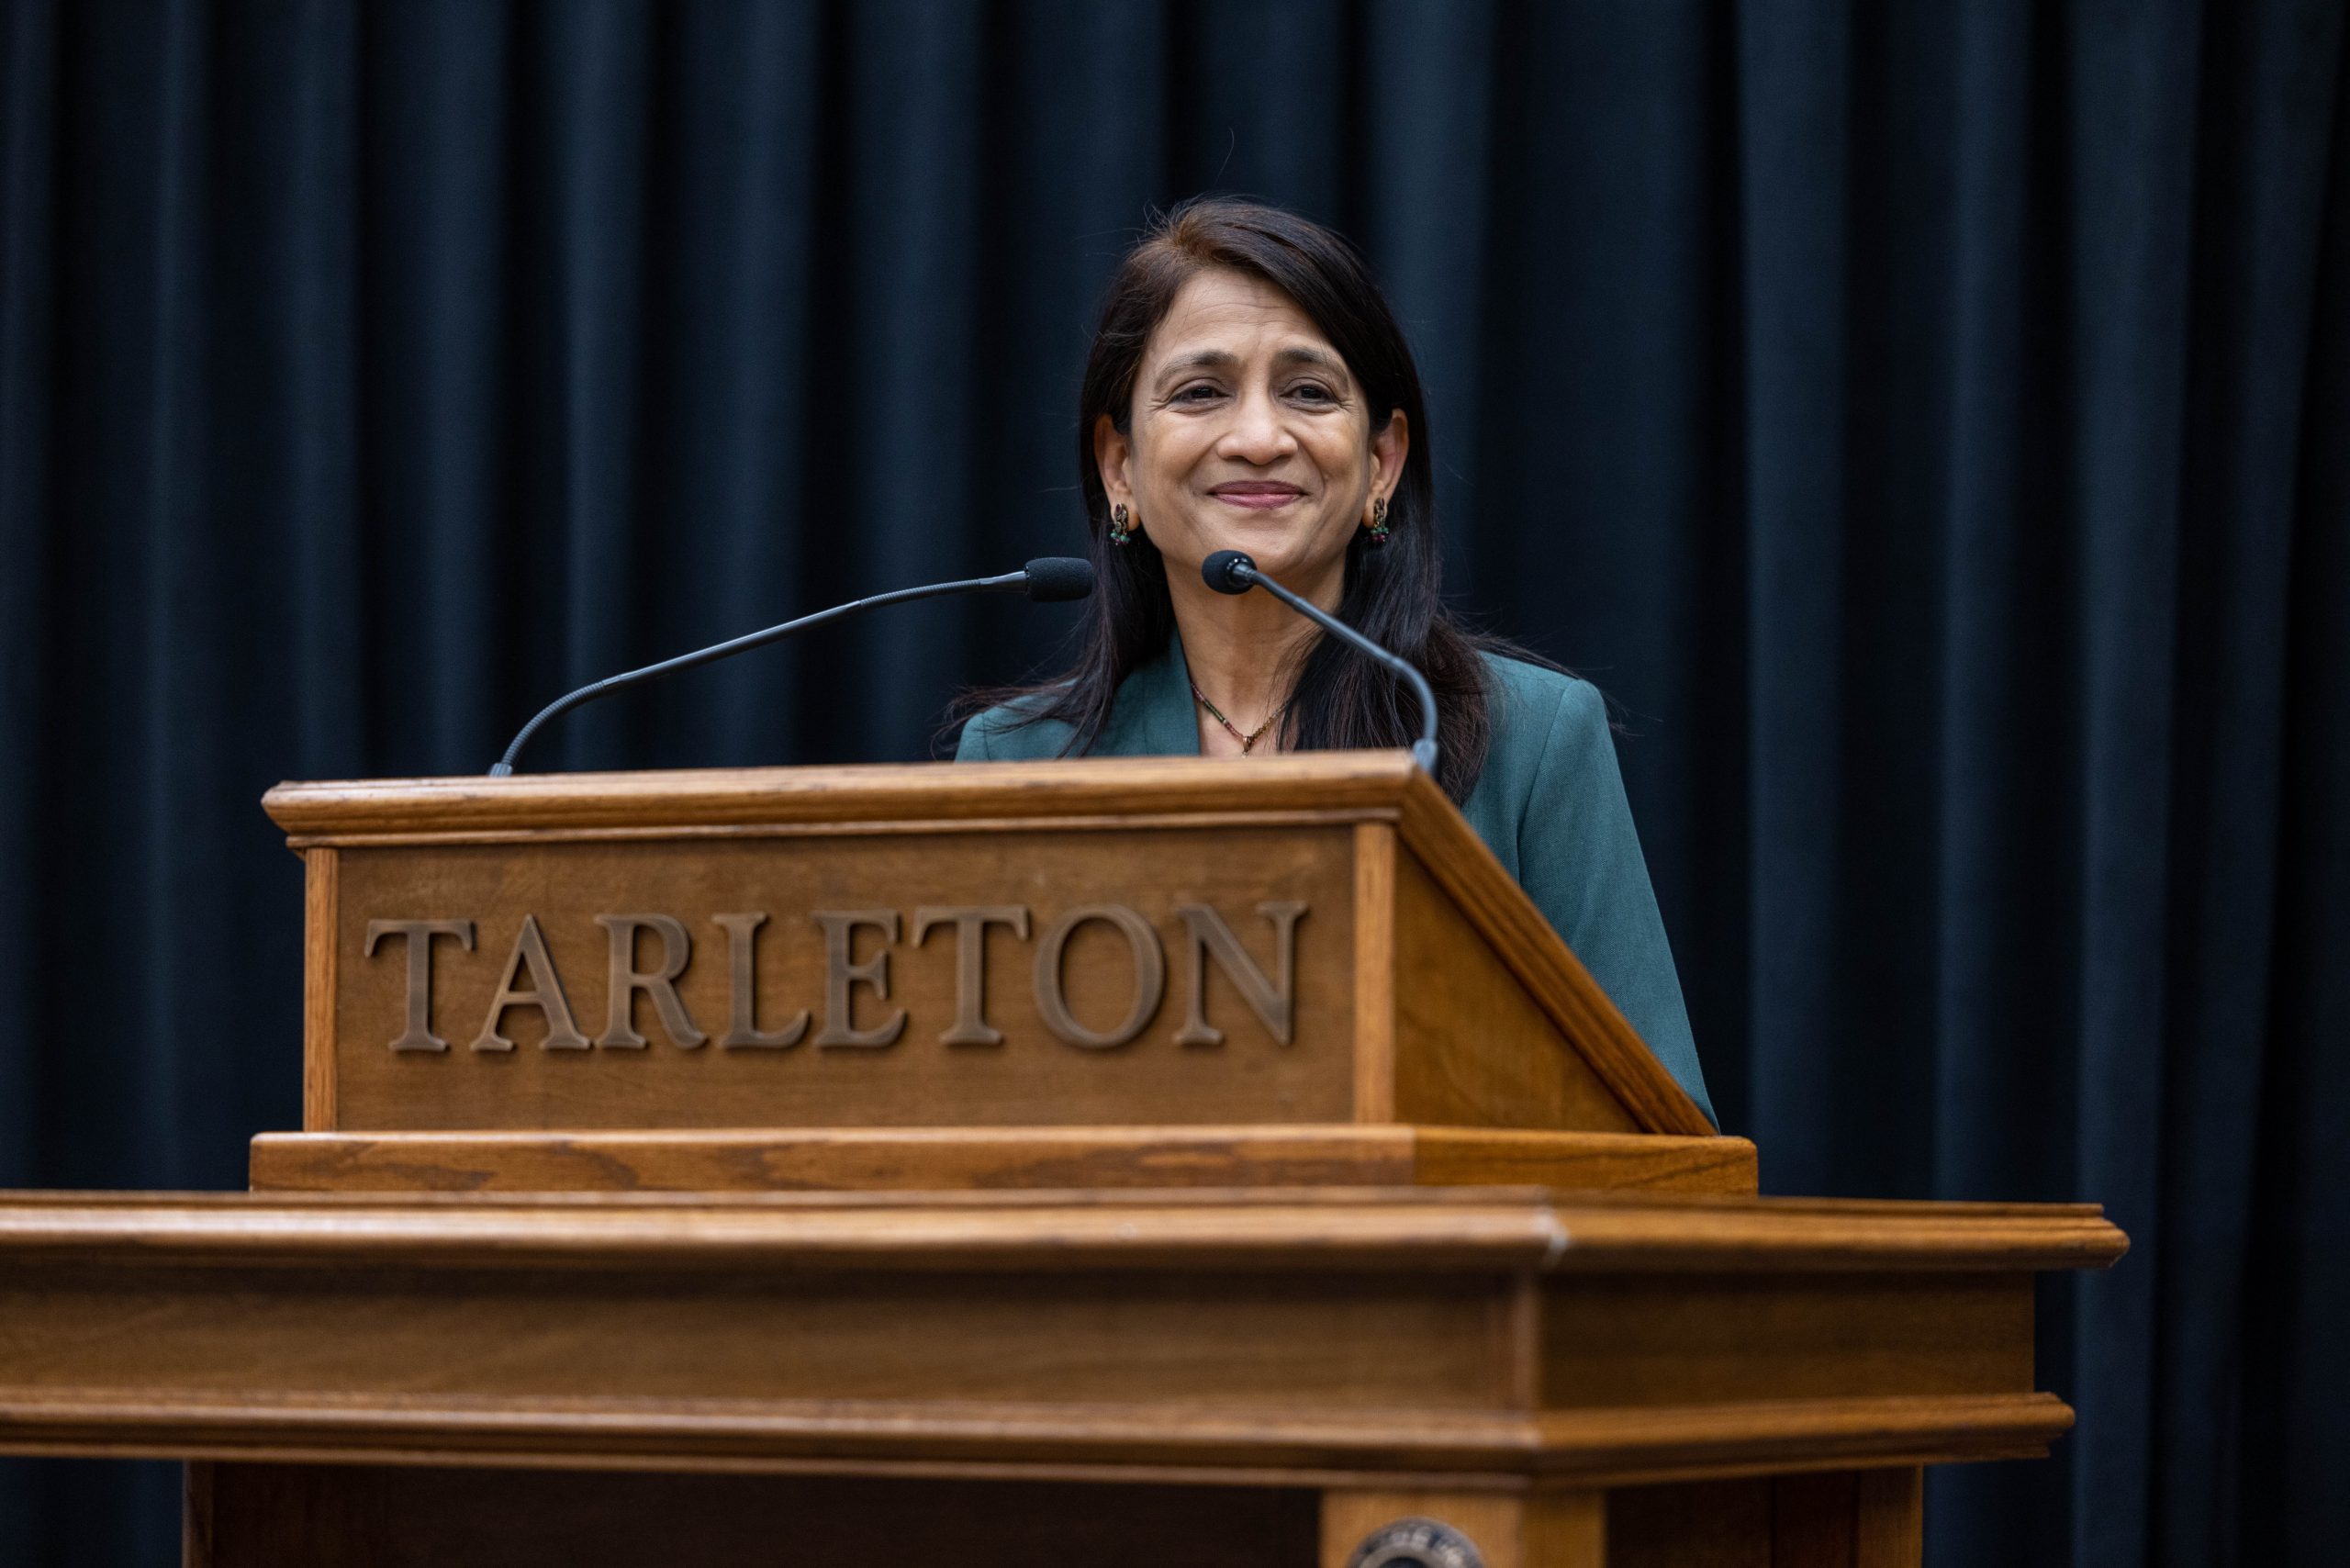 Dr. Iyer standing behind a podium